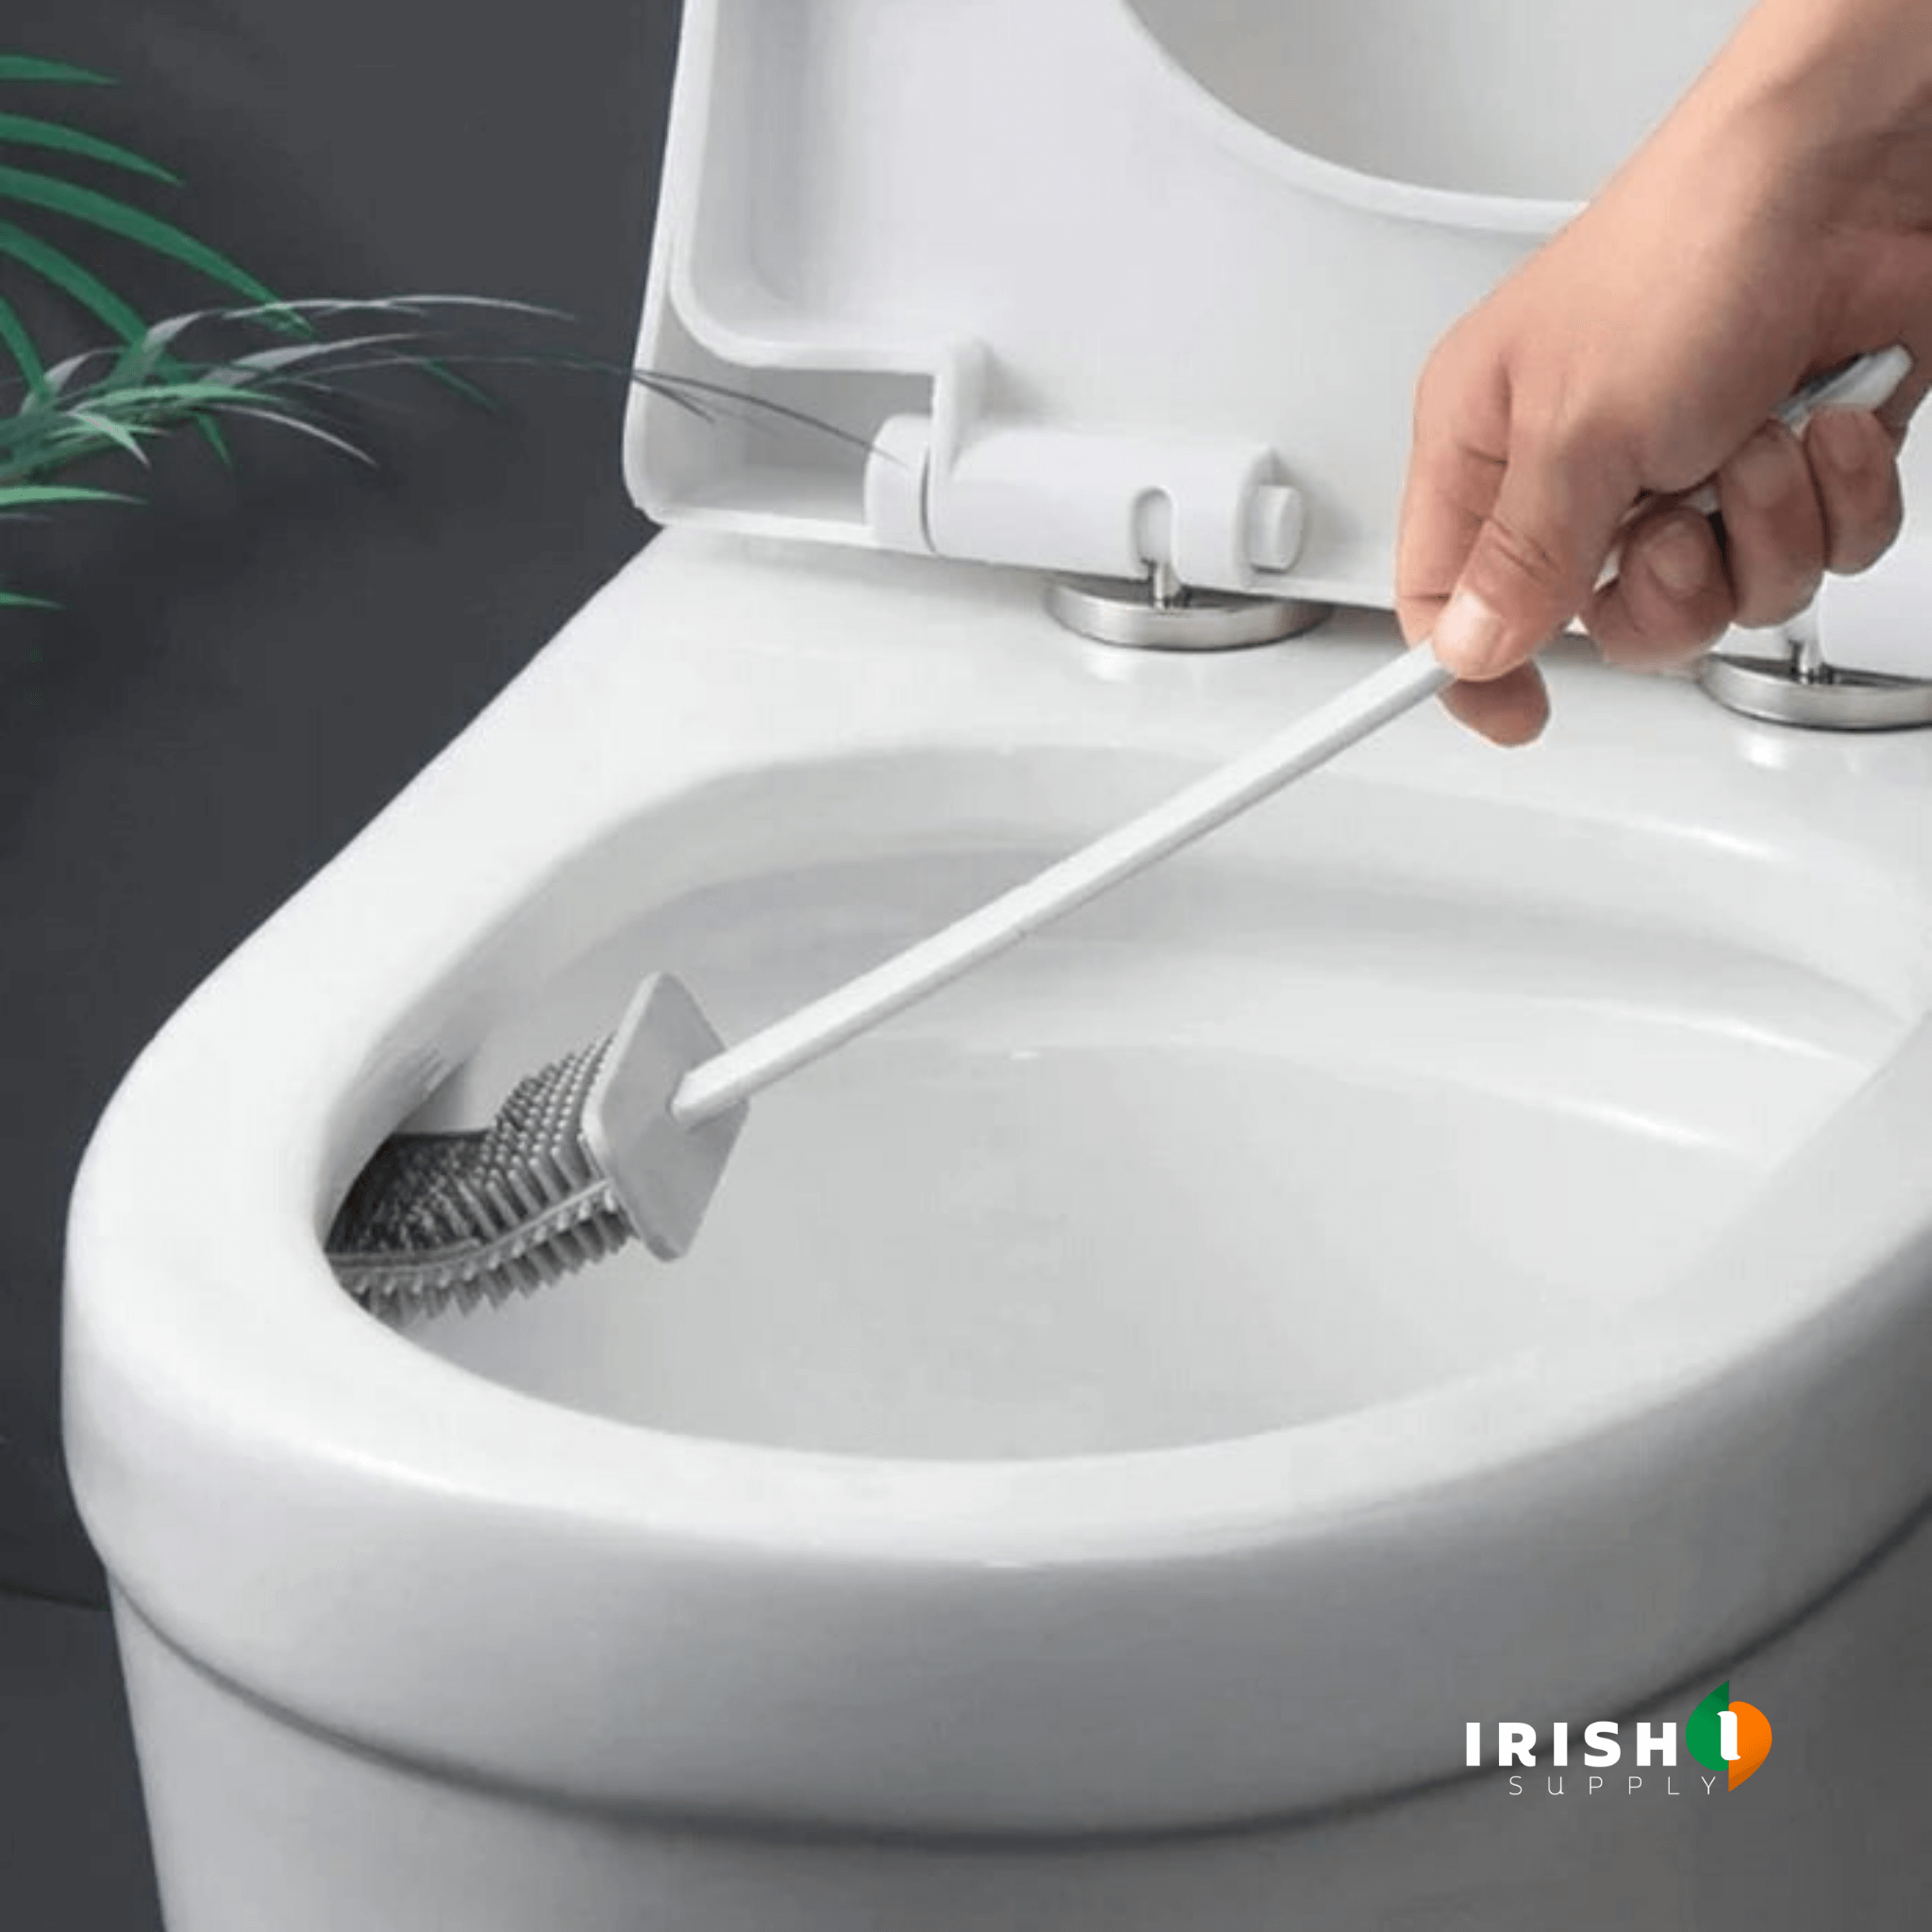 FLEXICLEAN Silicone Toilet Brush and Holder Set